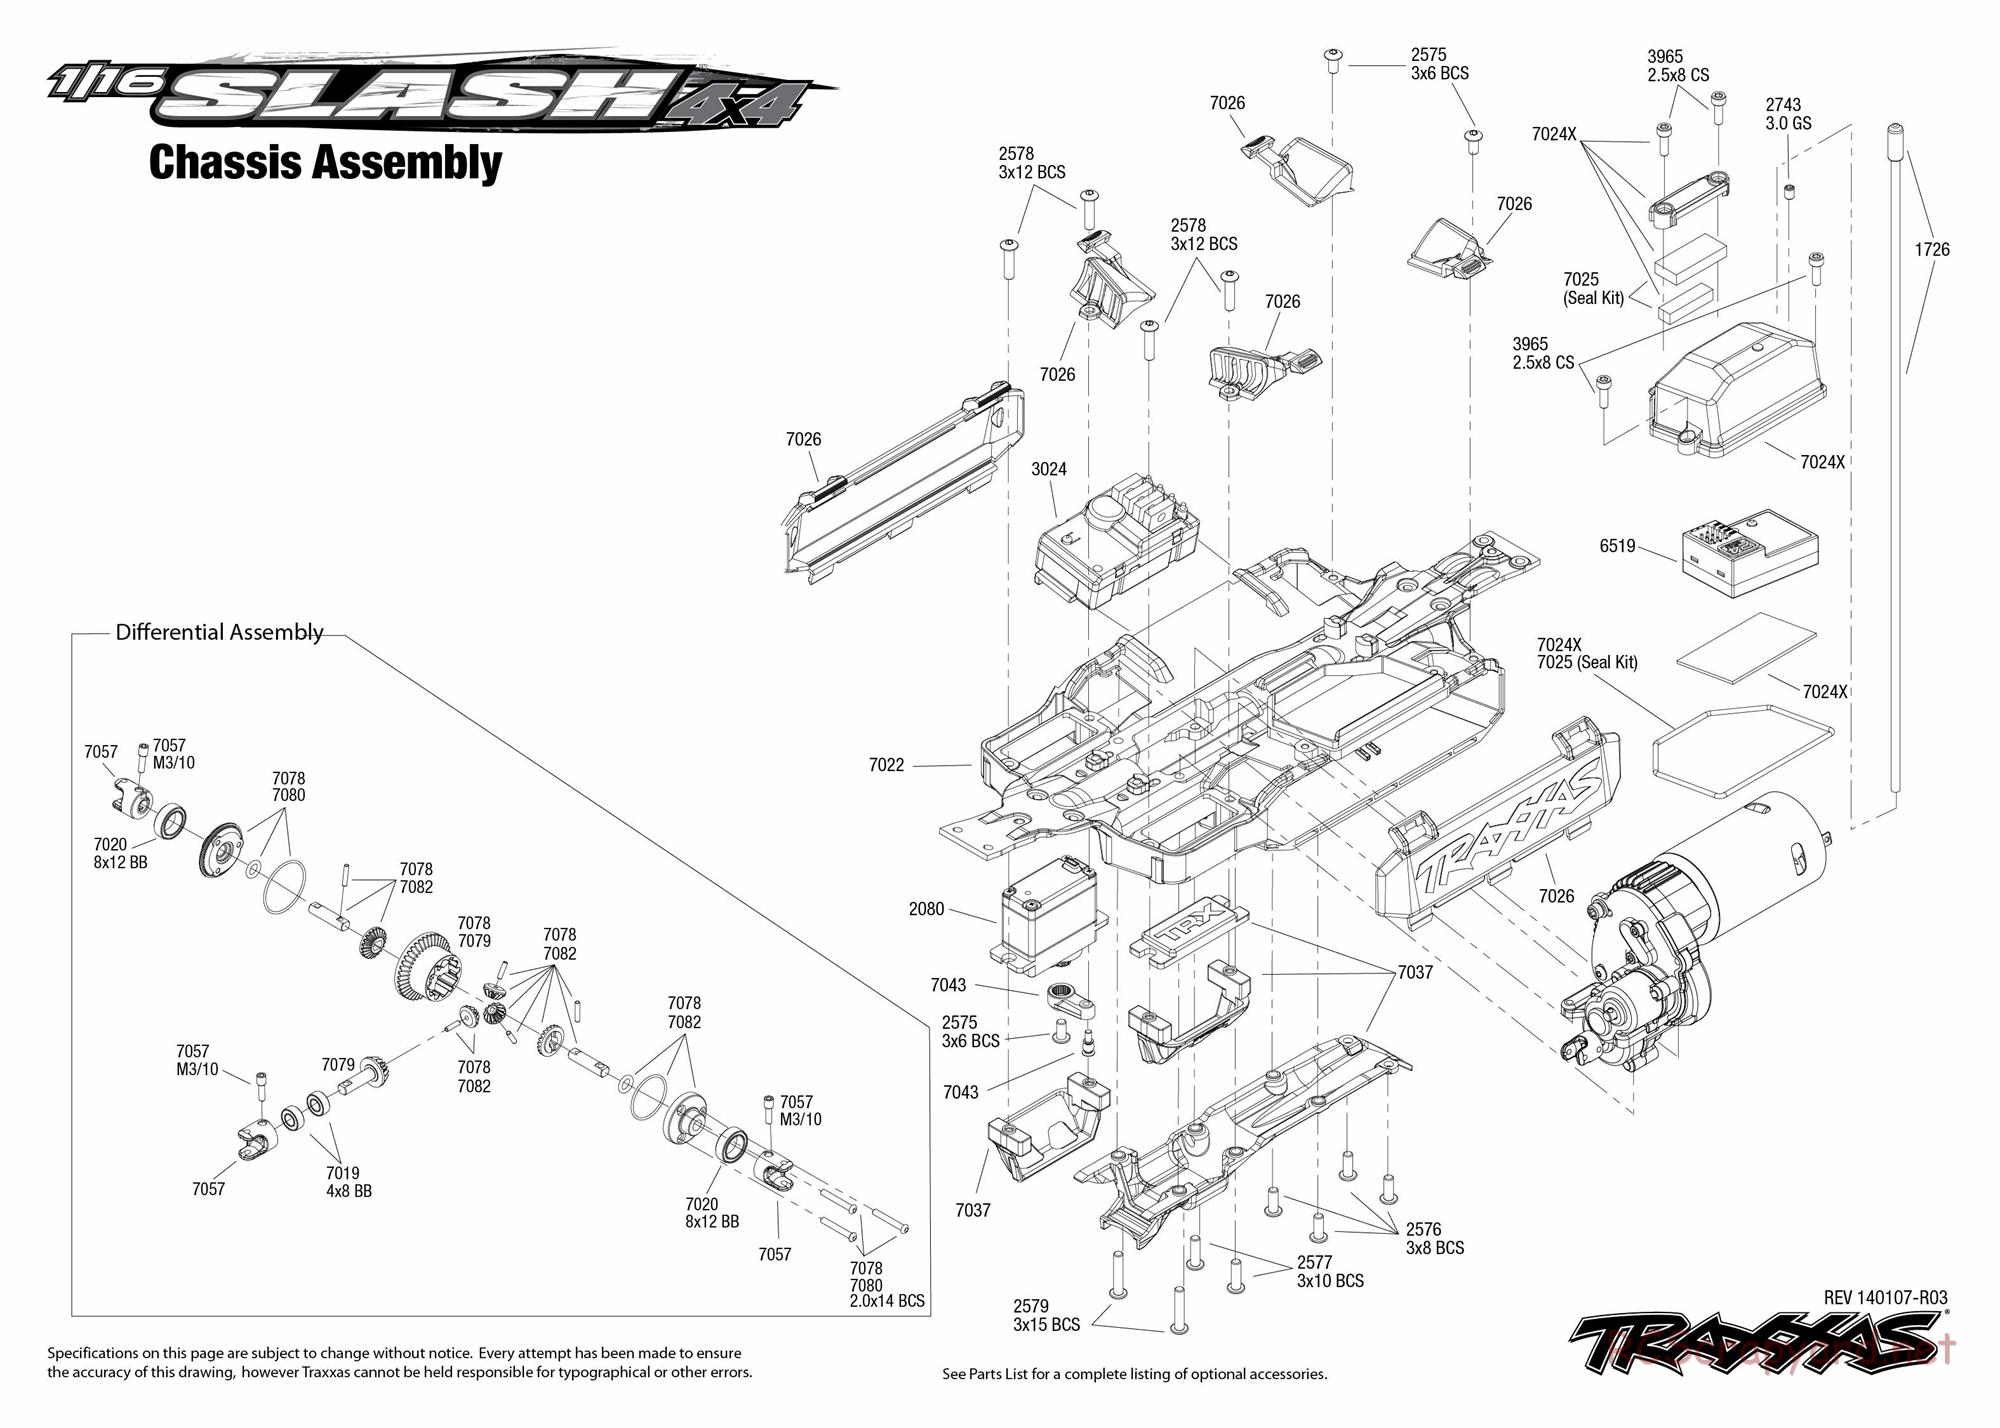 Traxxas - 1/16 Slash 4x4 Brushed (2013) - Exploded Views - Page 1